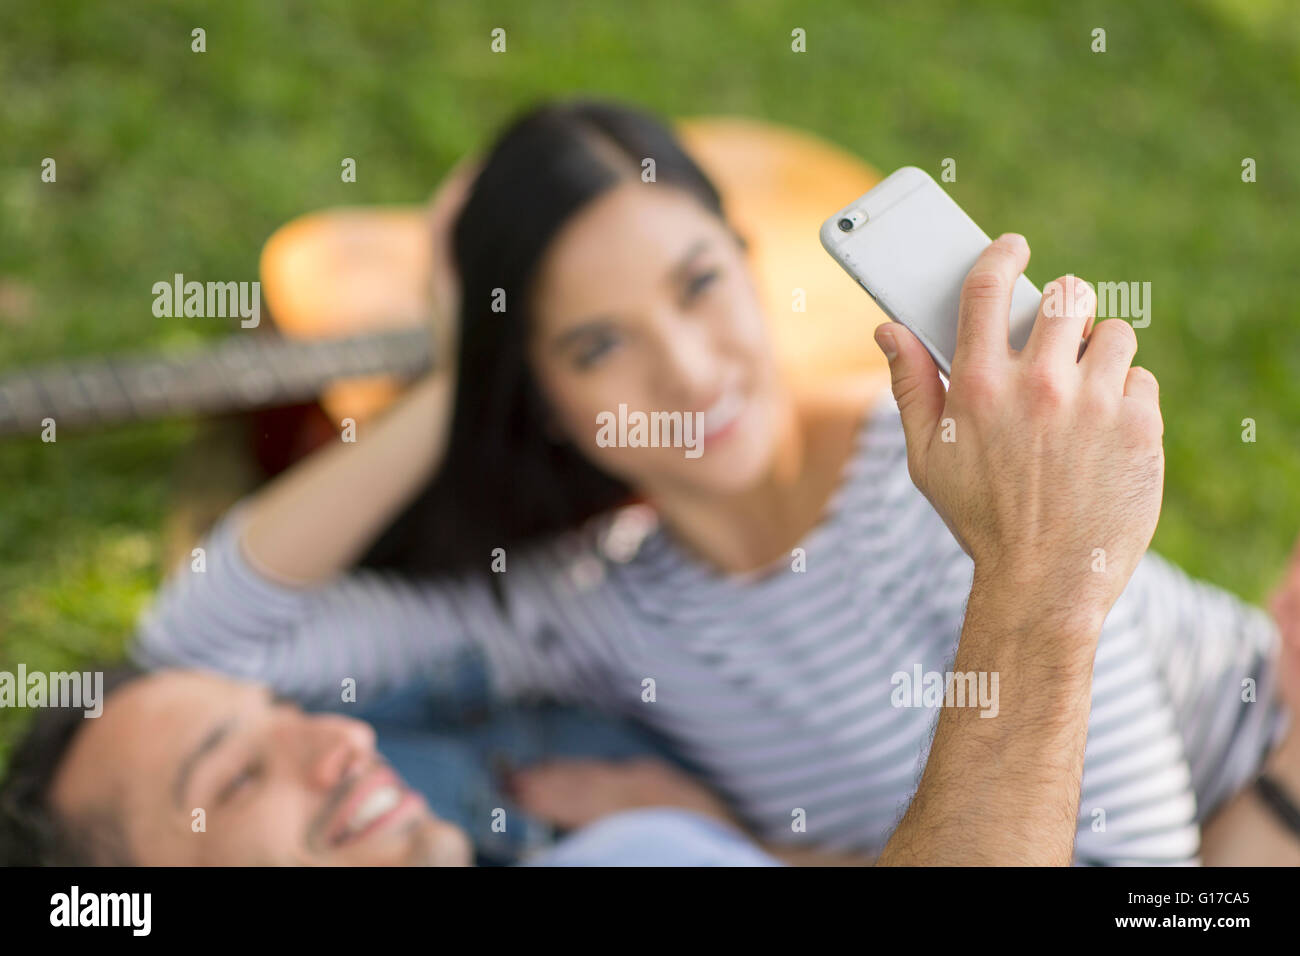 Couple lying on grass using smartphone to take selfie Stock Photo